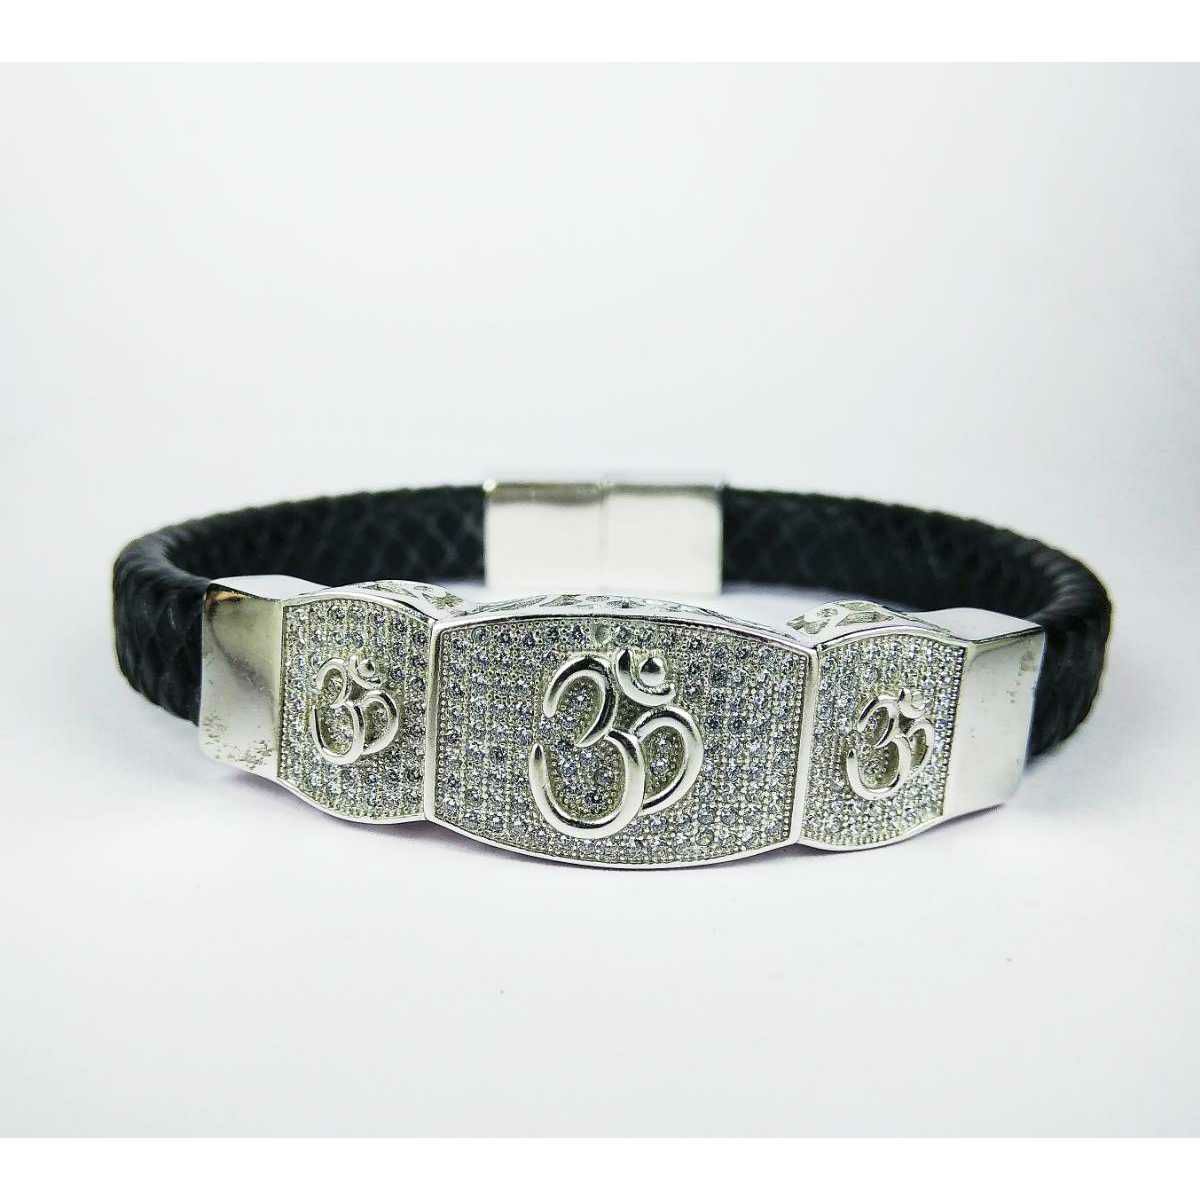 New 925 Silver Gents Black Leather Bracelet With Om